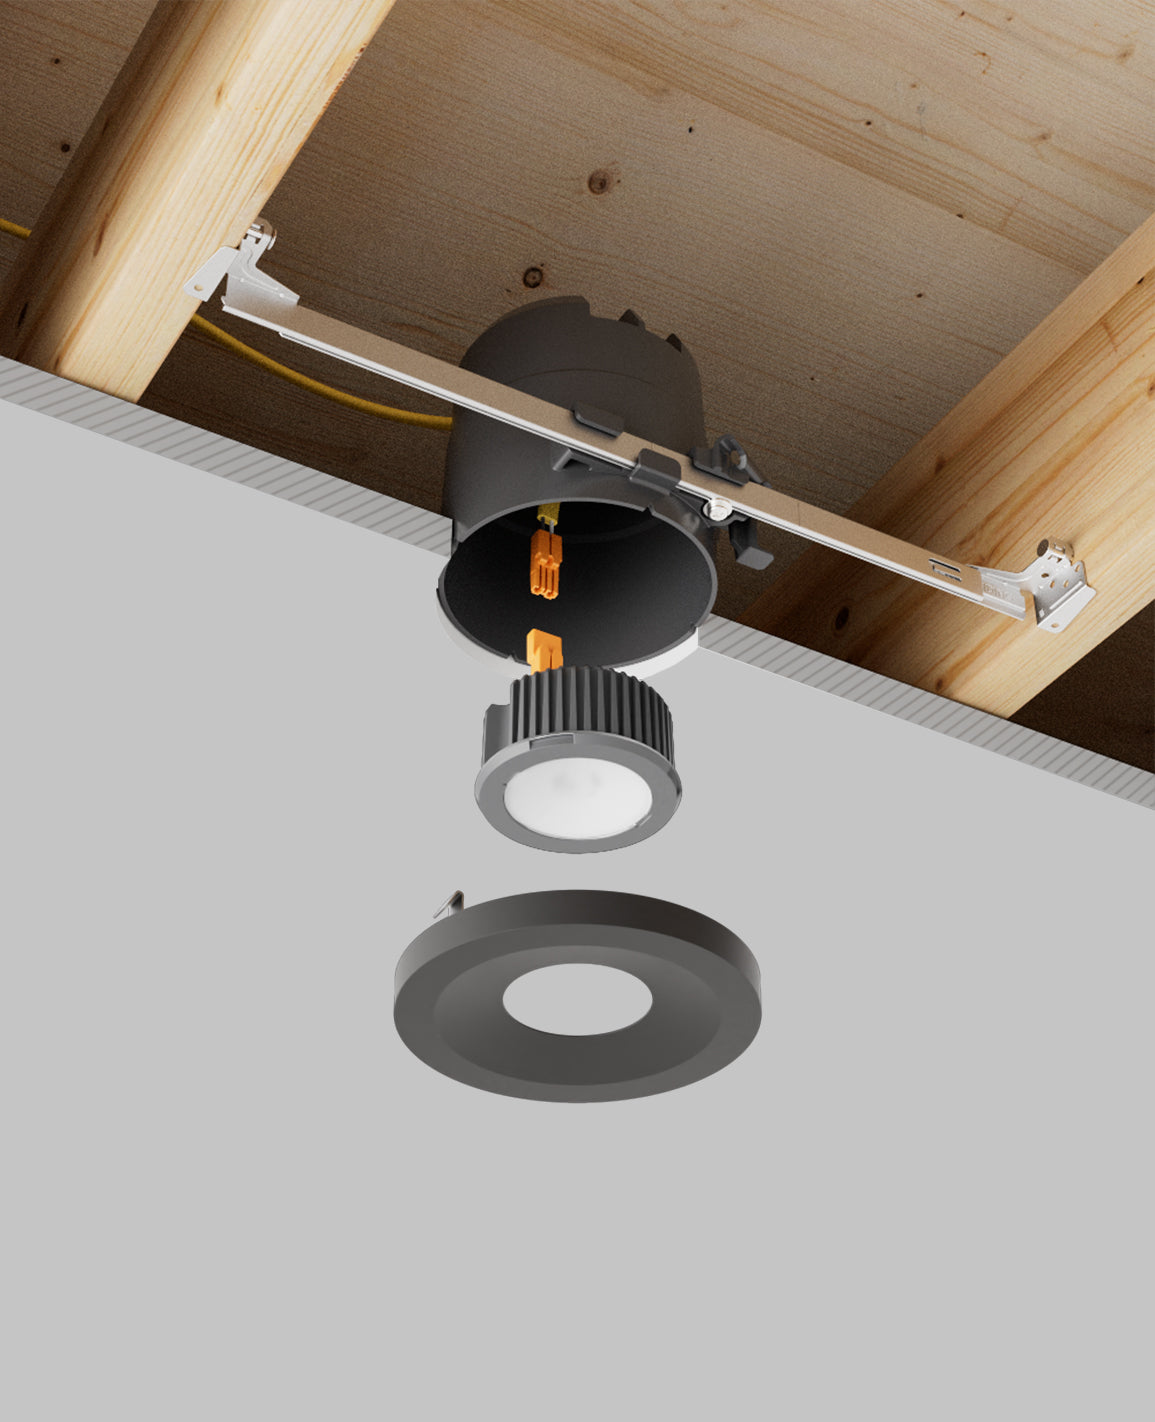 LUSA 4" recessed light with bar hangers housing and black surface trim